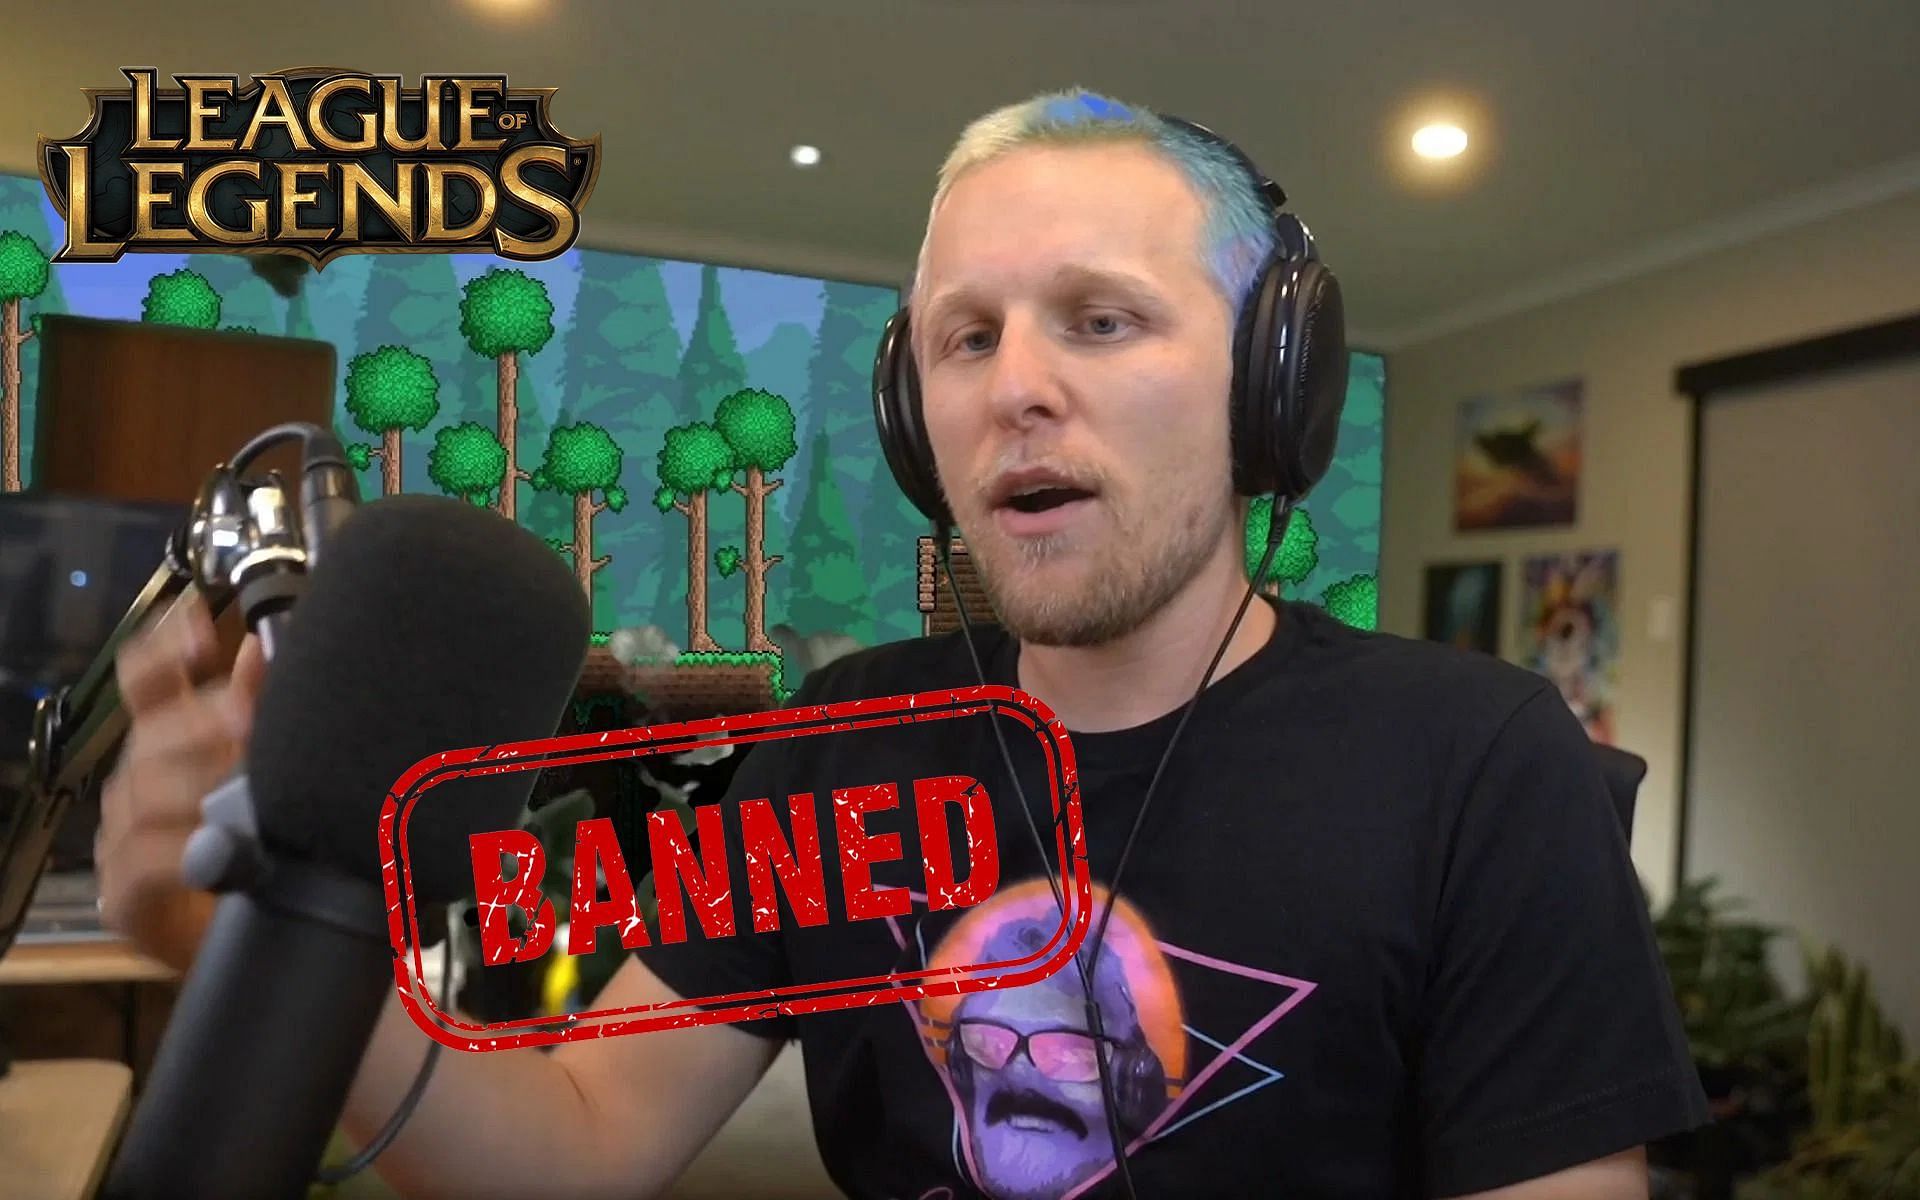 Twitch streamer Quin69 receives multiple bans in a span of a few days (Images via Sportskeeda)